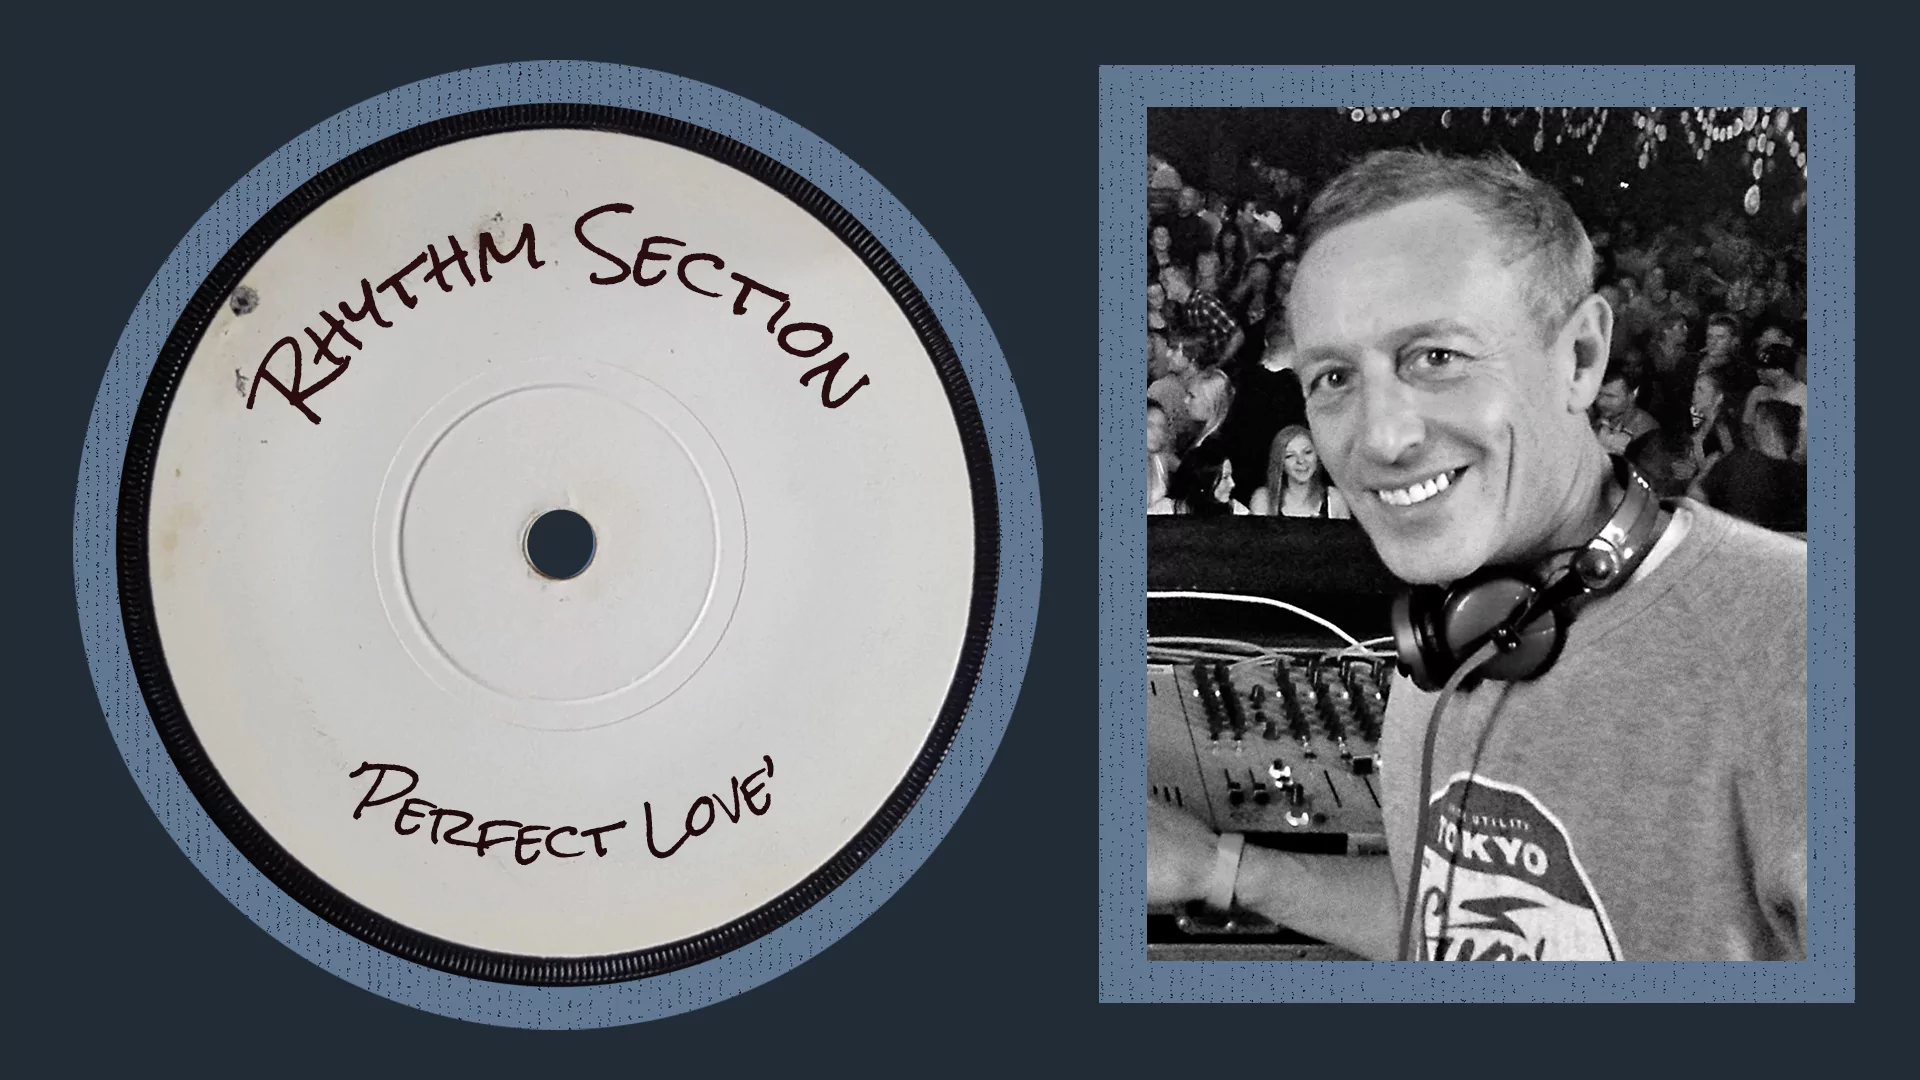 Black-and-white profile image of Ellis Dee with Rhythm Section 'Perfect Love (original dubplate version)' dubplate